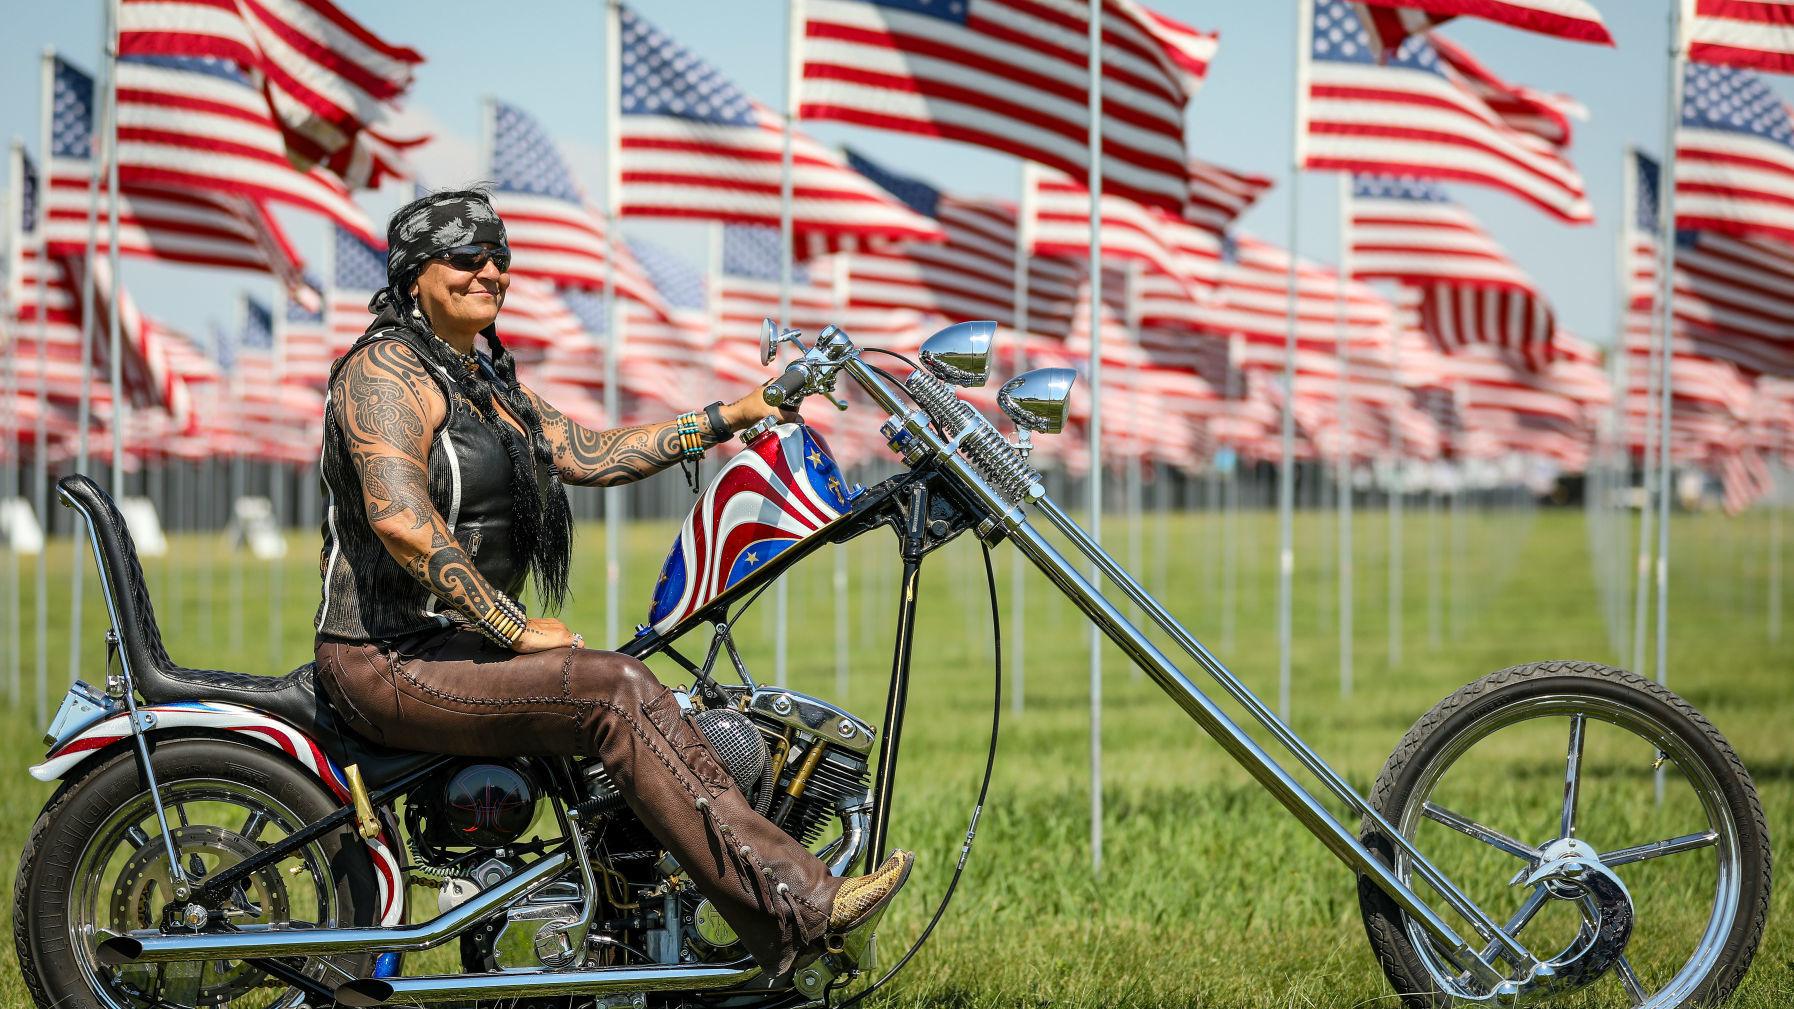 What we know so far about the 80th Sturgis Motorcycle Rally